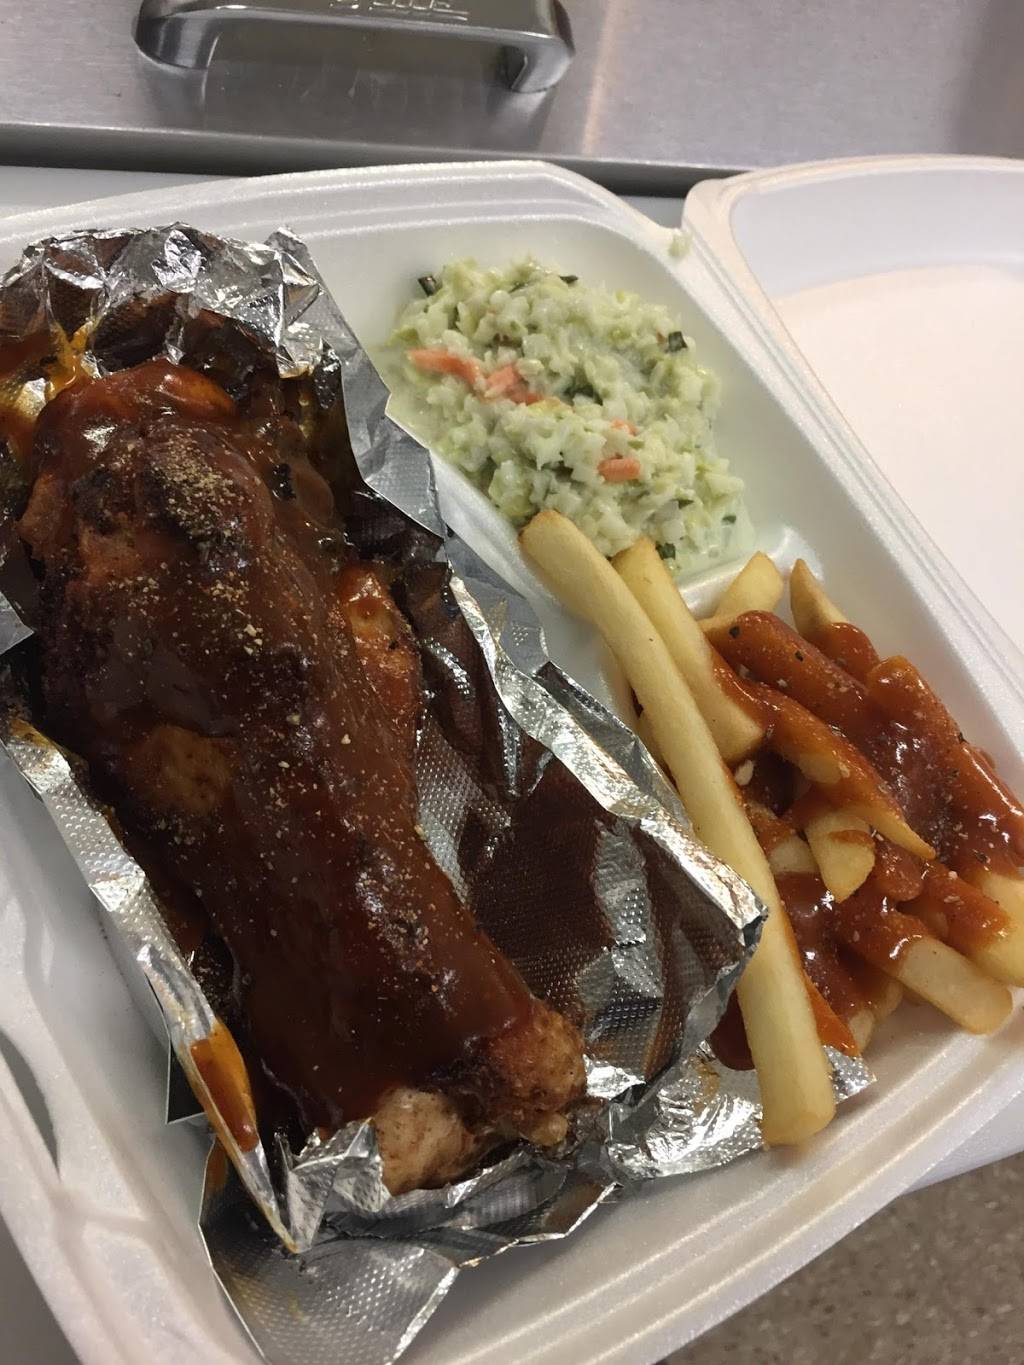 The Best Thing Smokin Bbq Llc | 12808 Union Ave, Cleveland, OH 44105 | Phone: (216) 309-7106